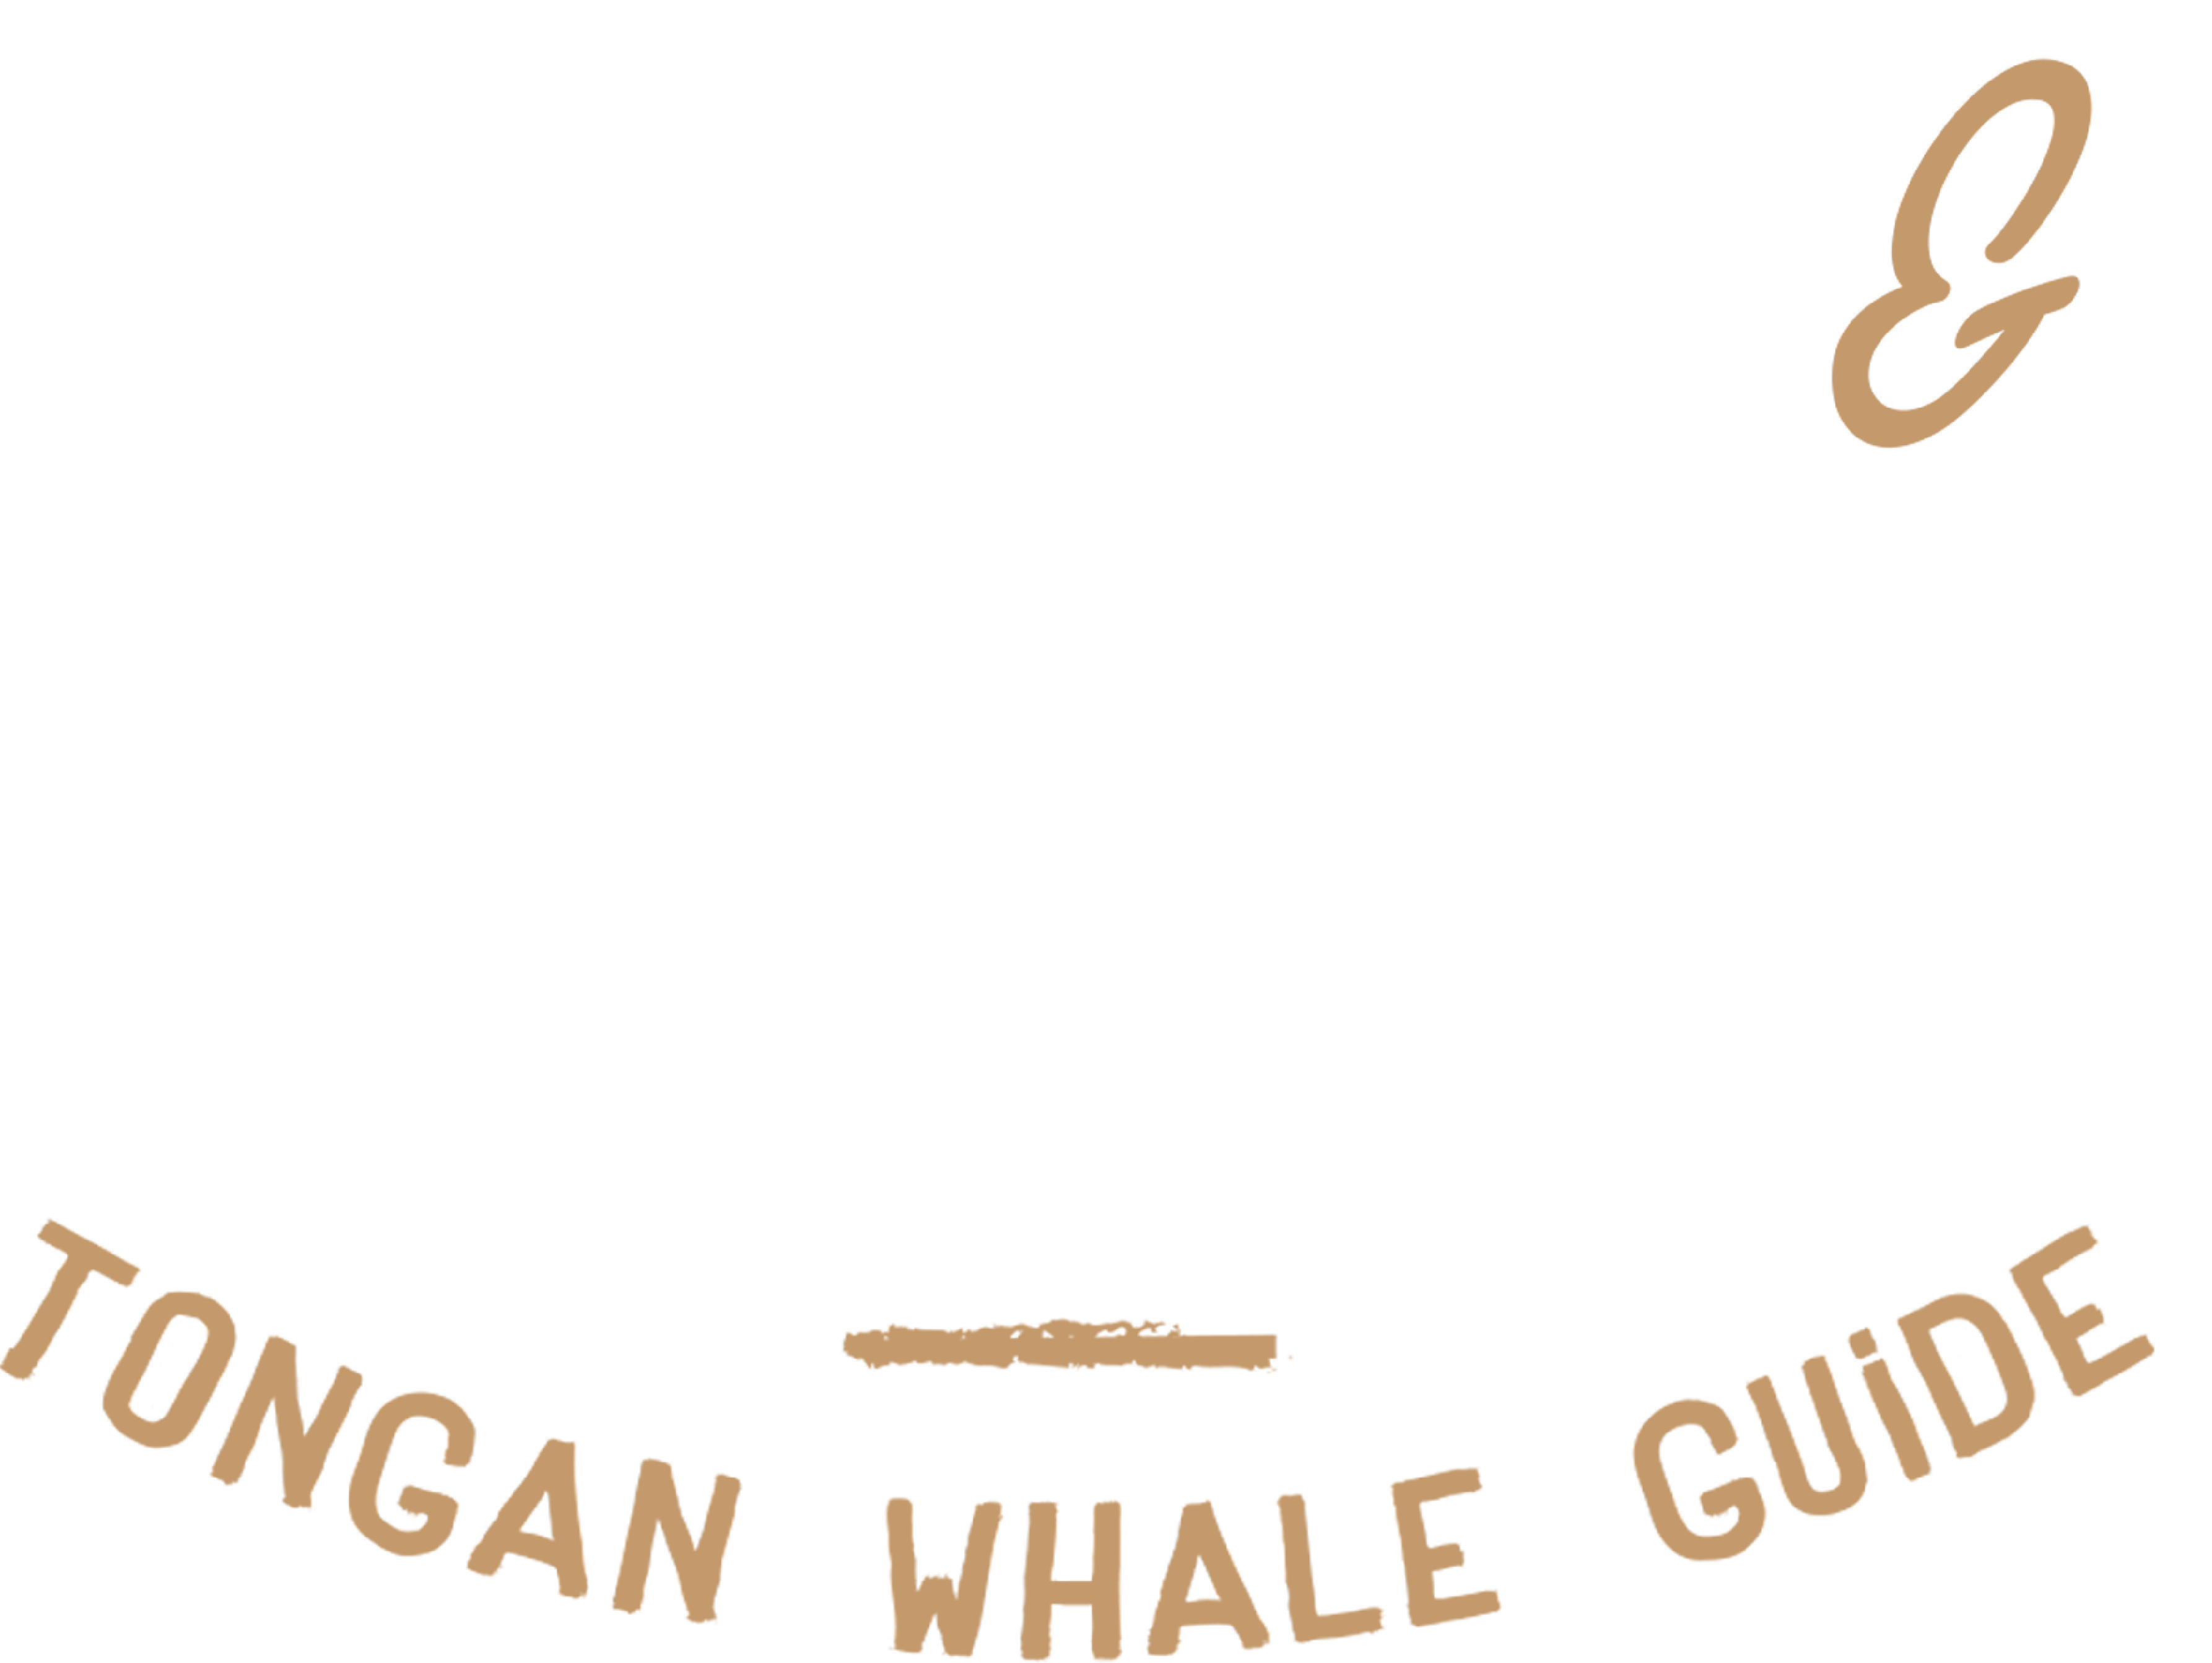 Water & Solitude, The Story of a Tongan Whale Guide